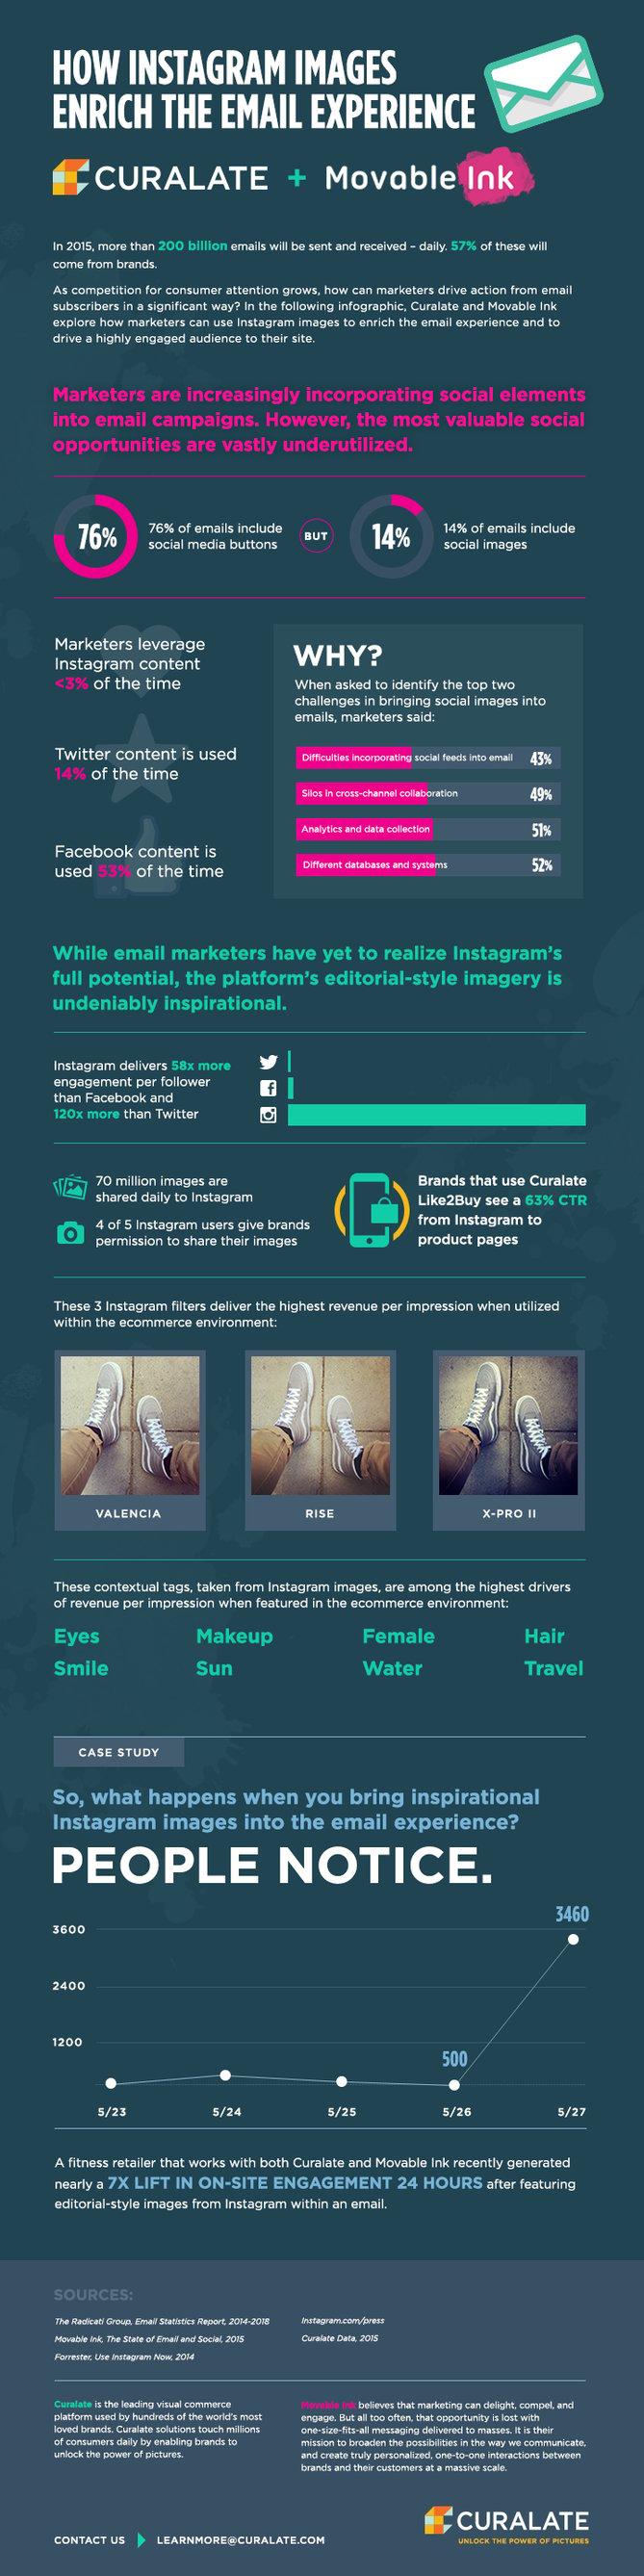 email-marketing-instagram-infographic.png